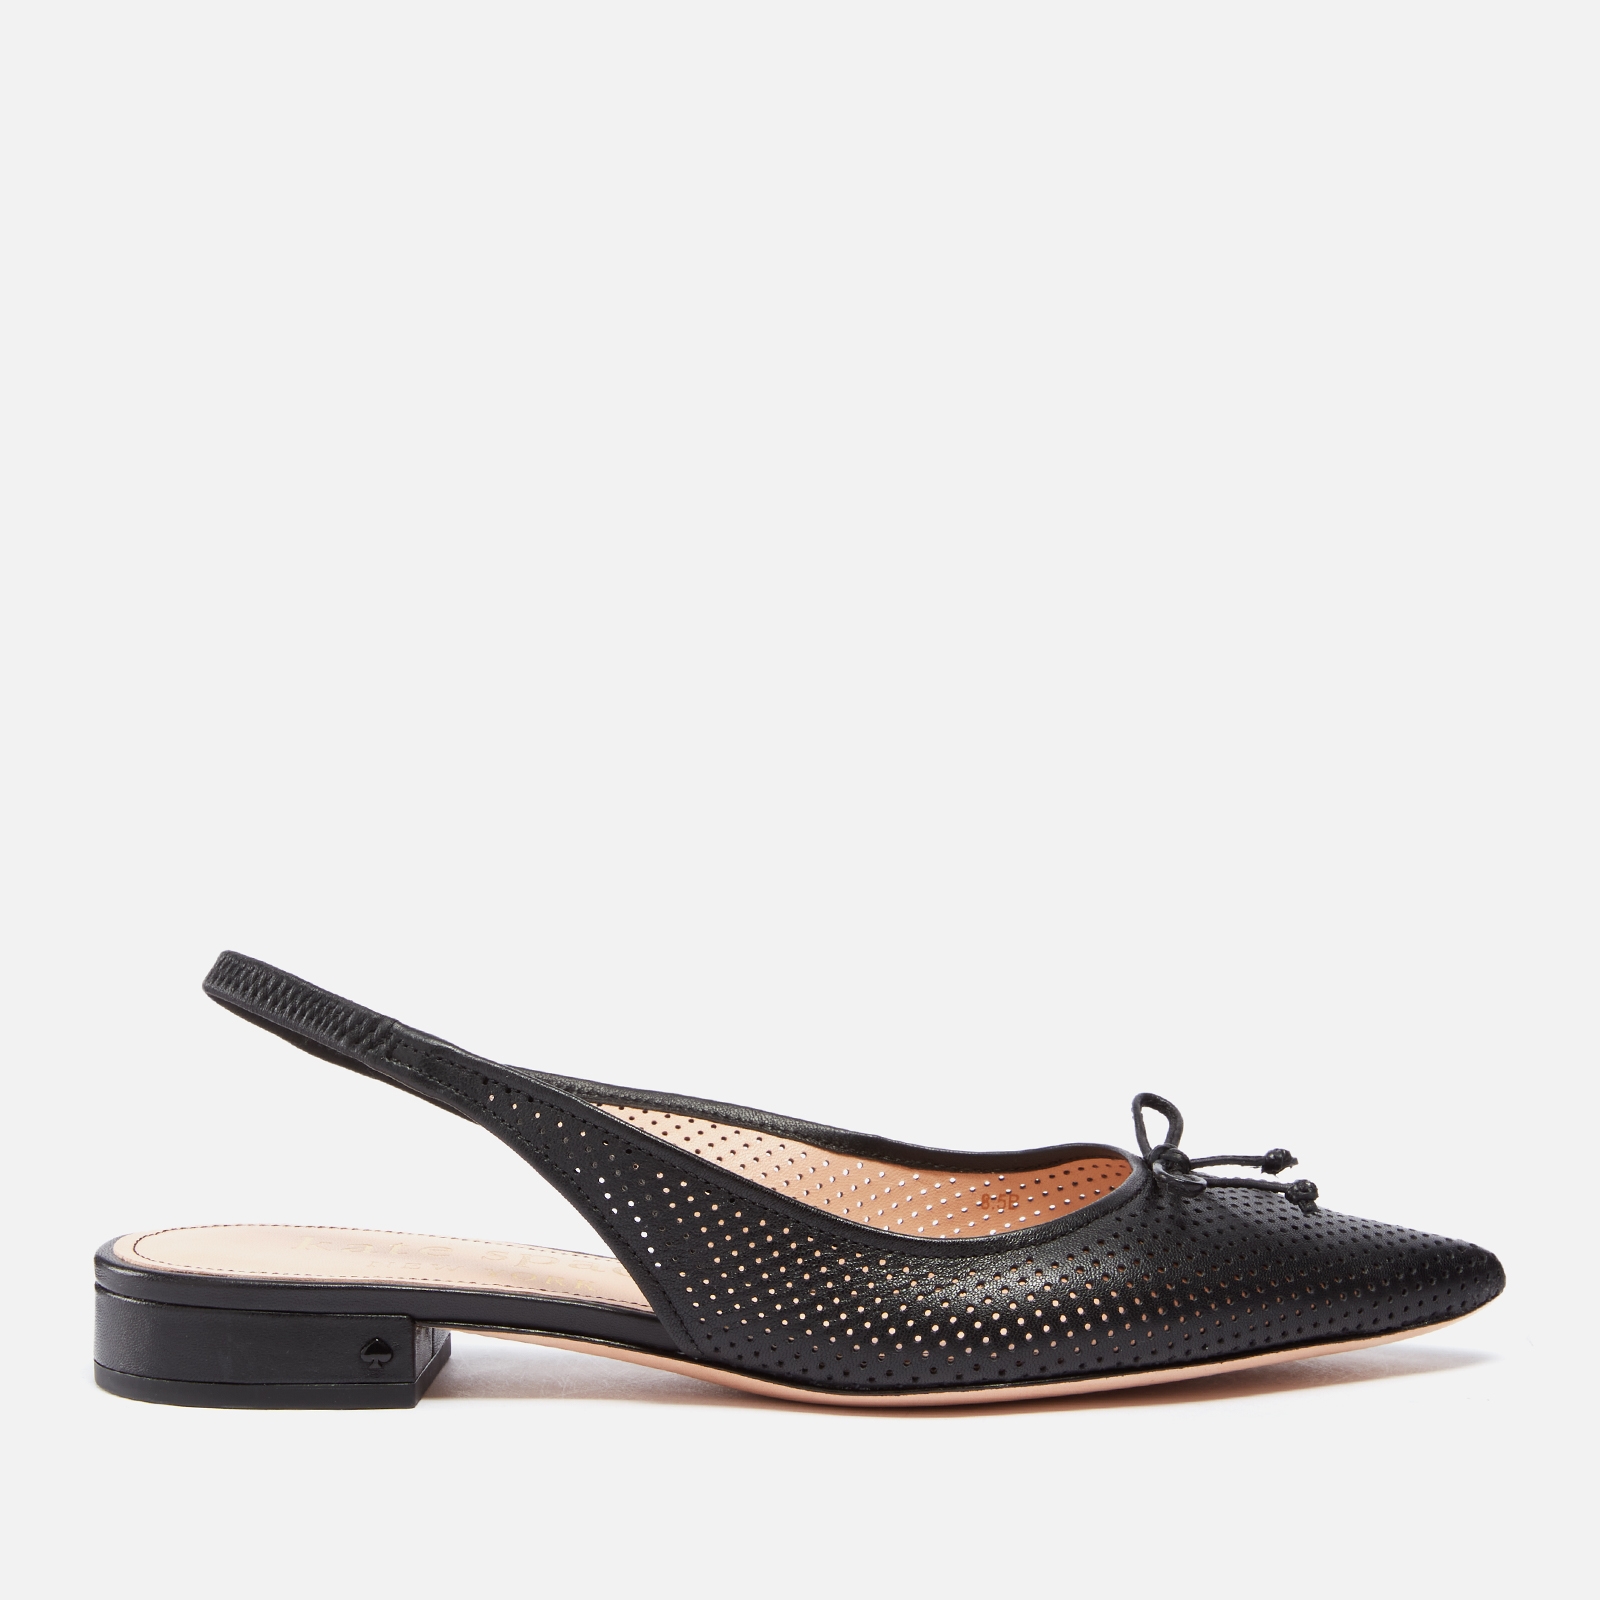 Kate Spade New York Women’s Veronica Leather Slingback Shoes